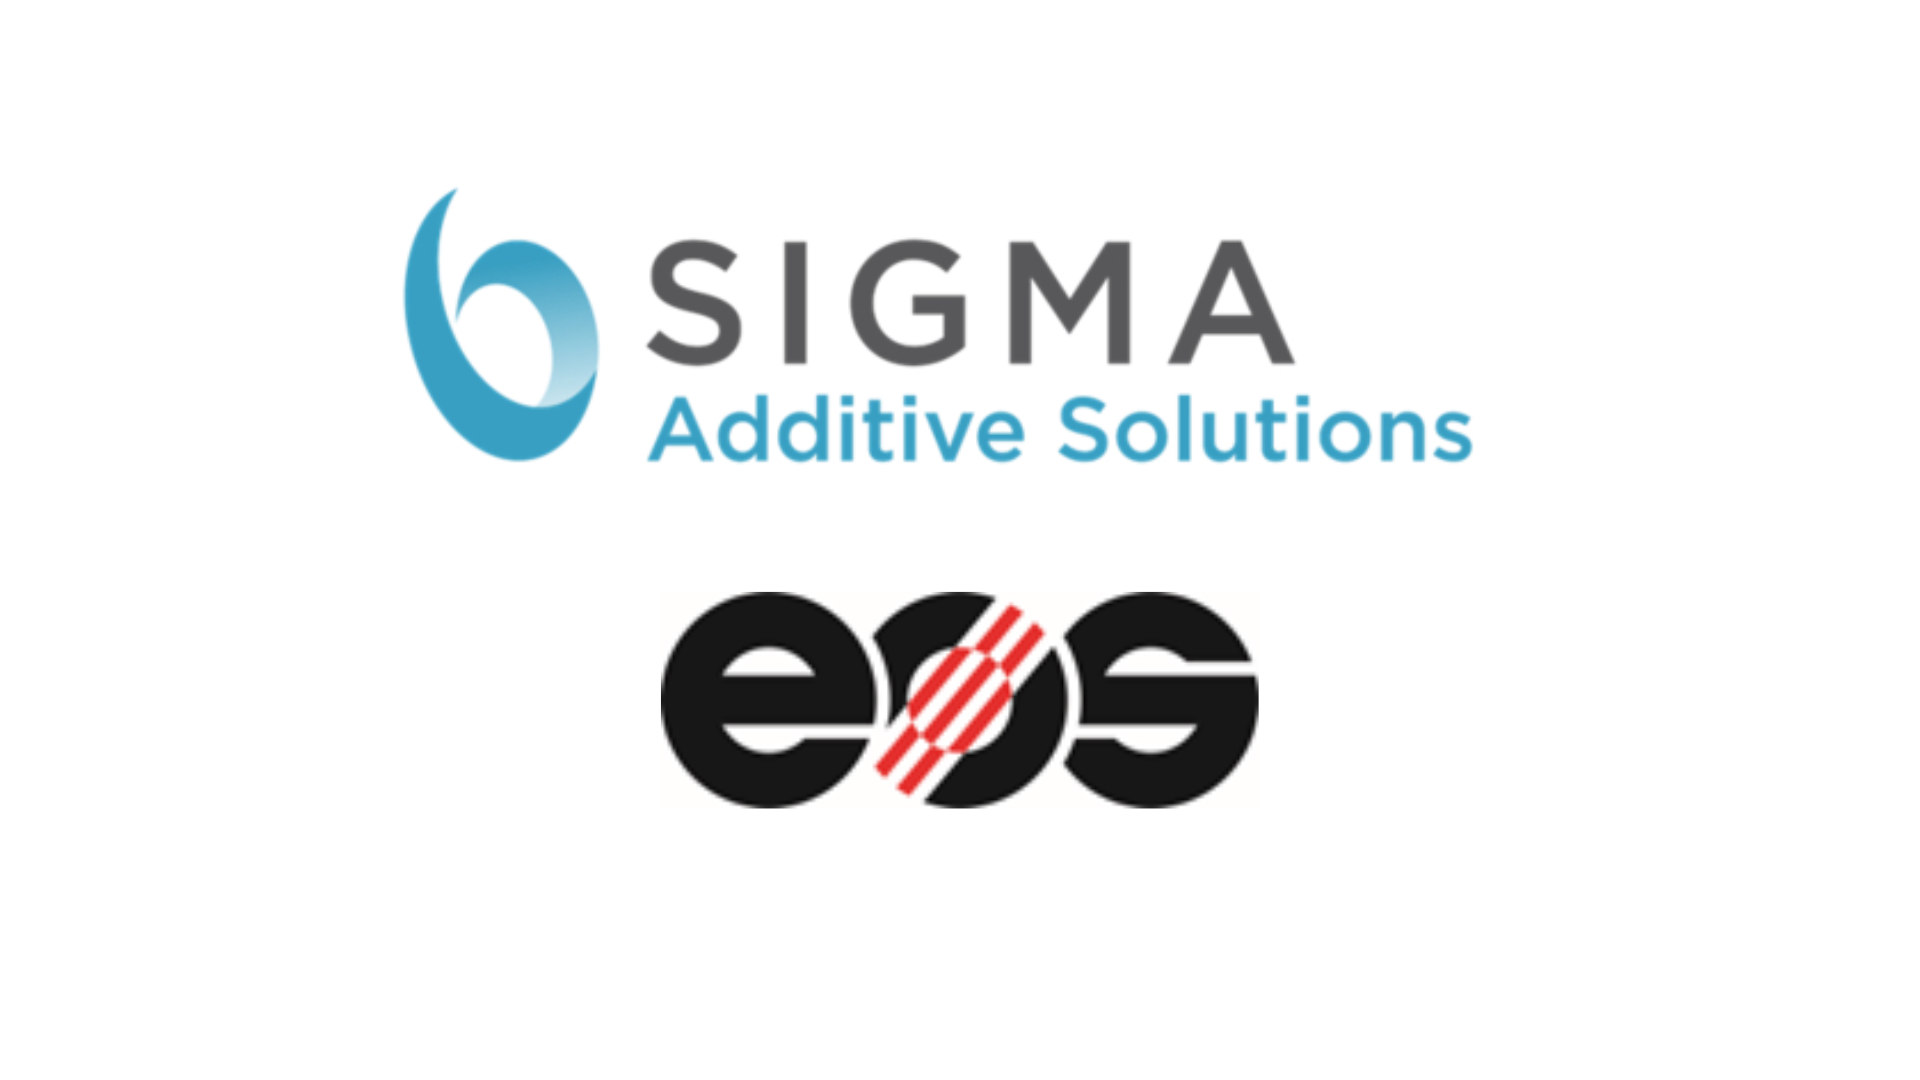 Sigma Additive Solutions has joined the EOS Developer Network (EDN) to provide software and analytics applications